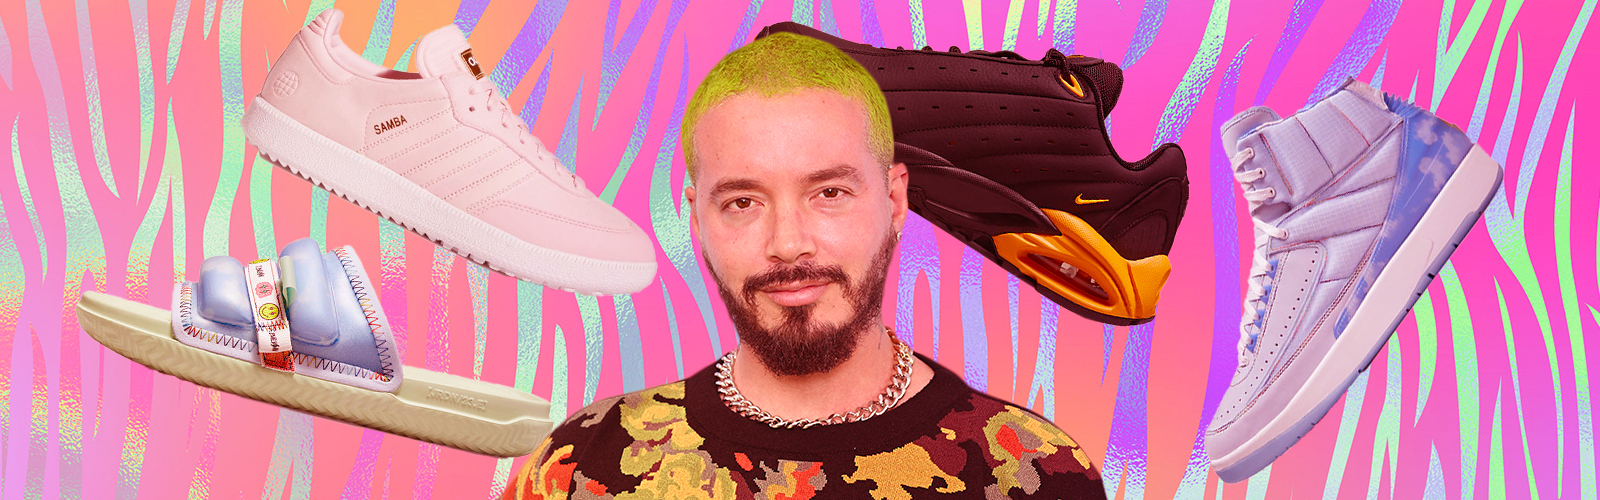 A New Light Up Collaboration with J Balvin and Air Jordan